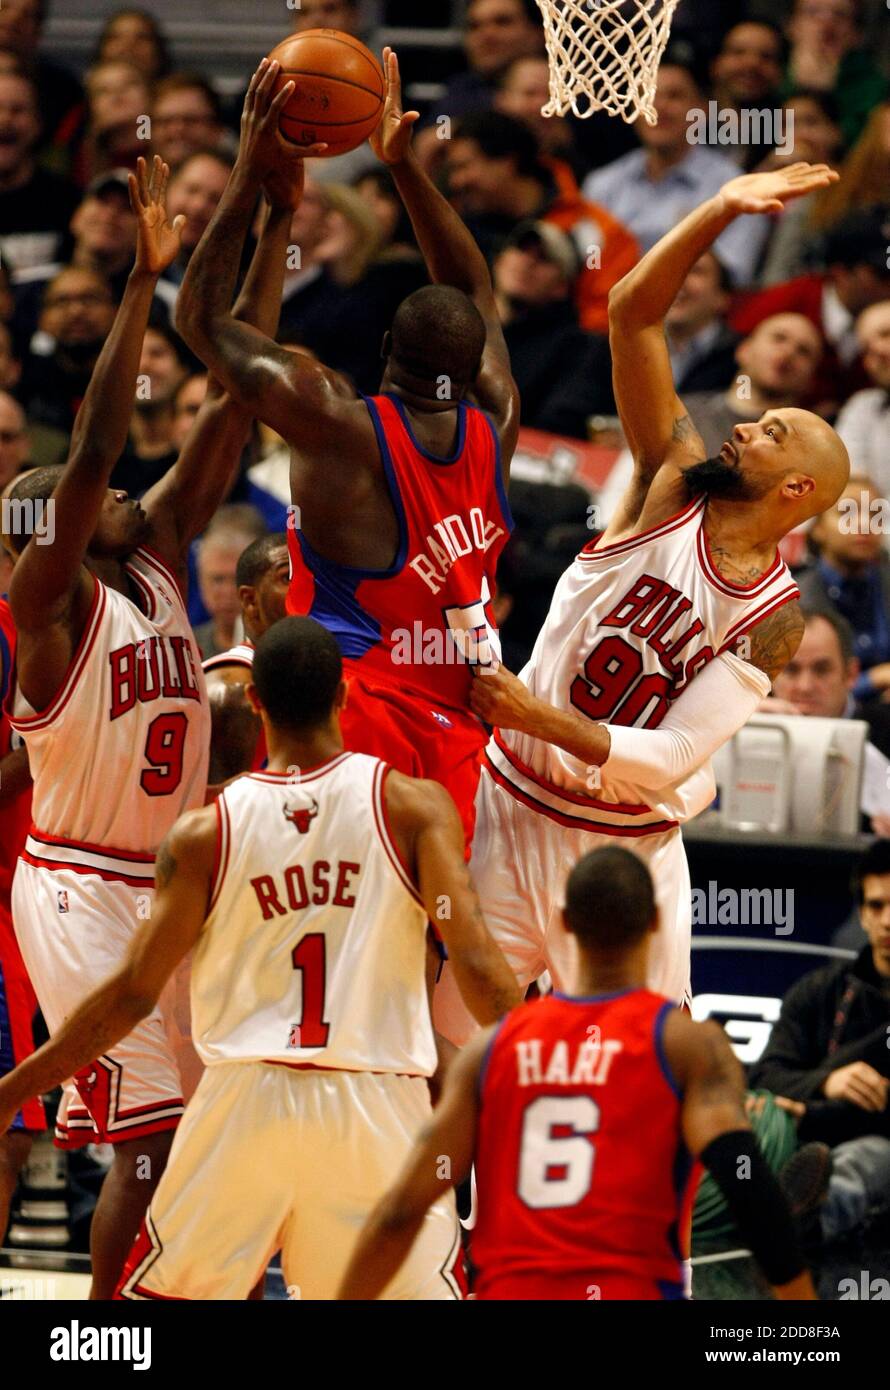 NO FILM, NO VIDEO, NO TV, NO DOCUMENTARY - Chicago Bulls' Drew Gooden and Luol Deng defend Los Angeles Clippers' Zach Randolph in the second quarter at the United Center in Chicago, IL, USA on December 17, 2008. The Clippers defeated the Bulls, 109-106. Photo by Scott Strazzante/Chicago Tribune/MCT/Cameleon/ABACAPRESS.COM Stock Photo